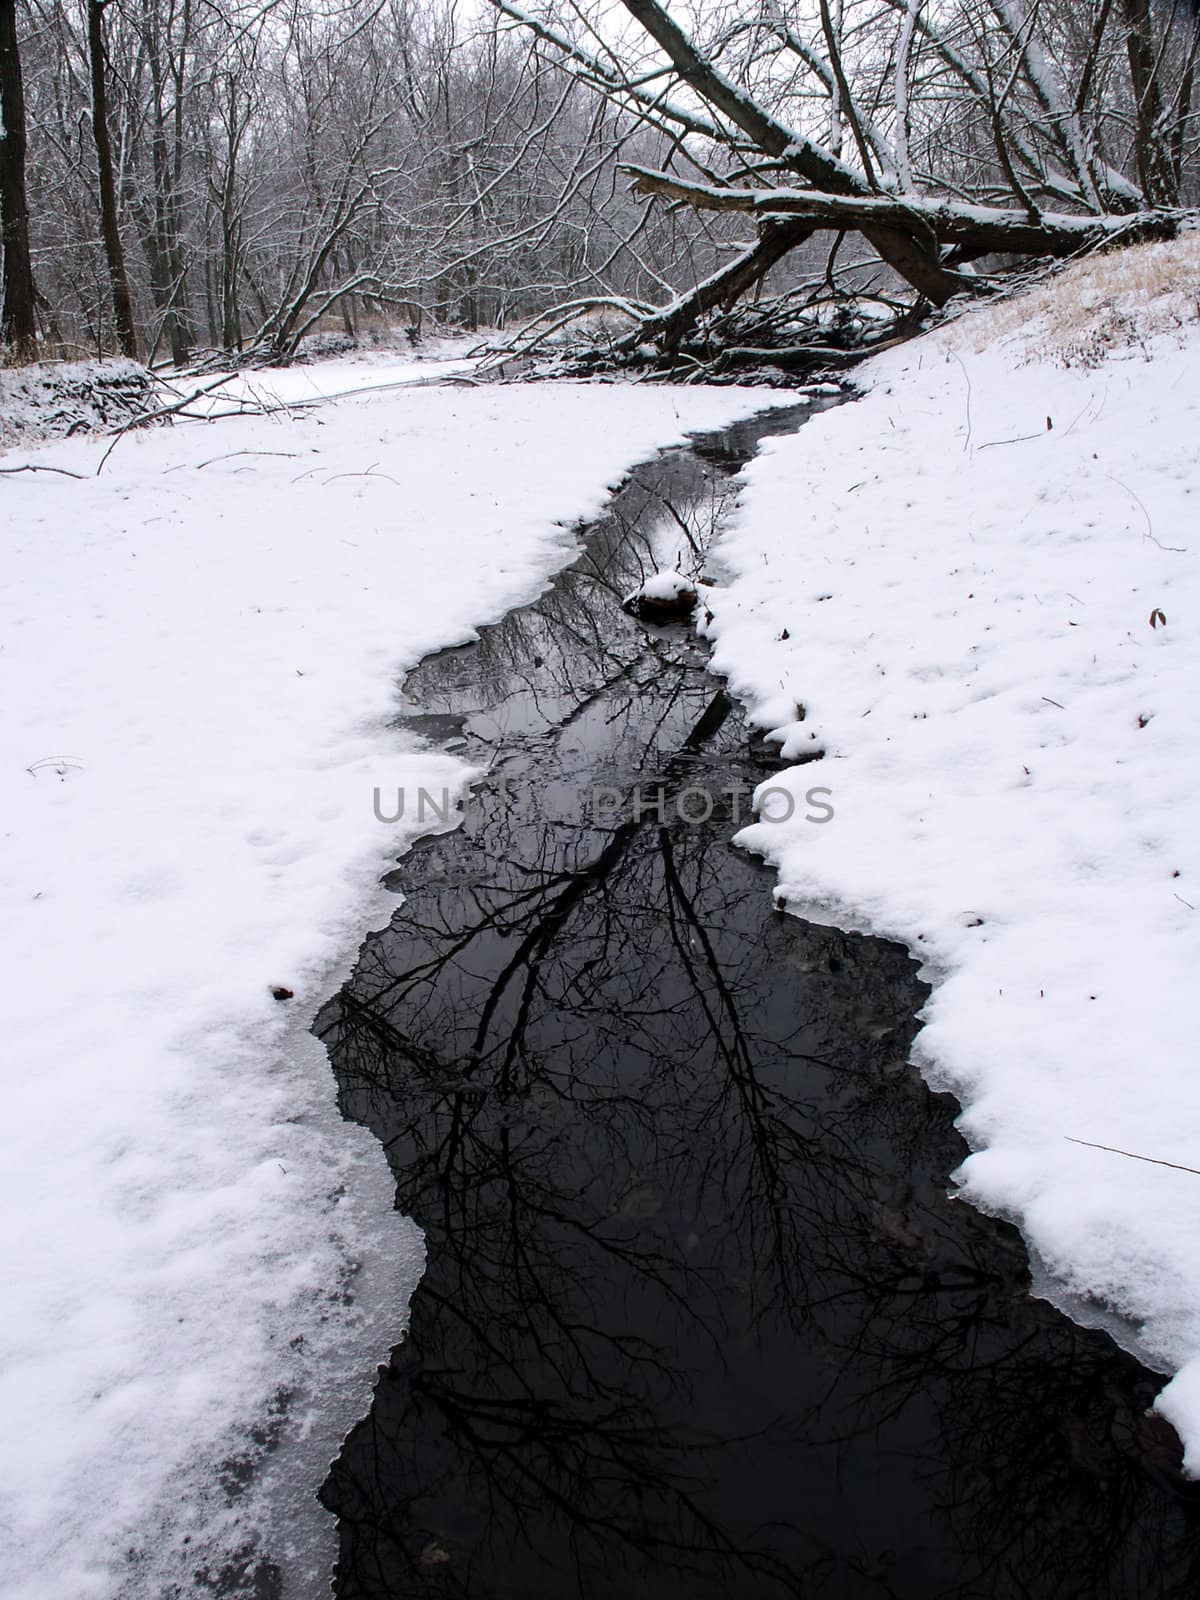 Stream runs through thick snowfall at Lib Conservation Area in northern Illinois.